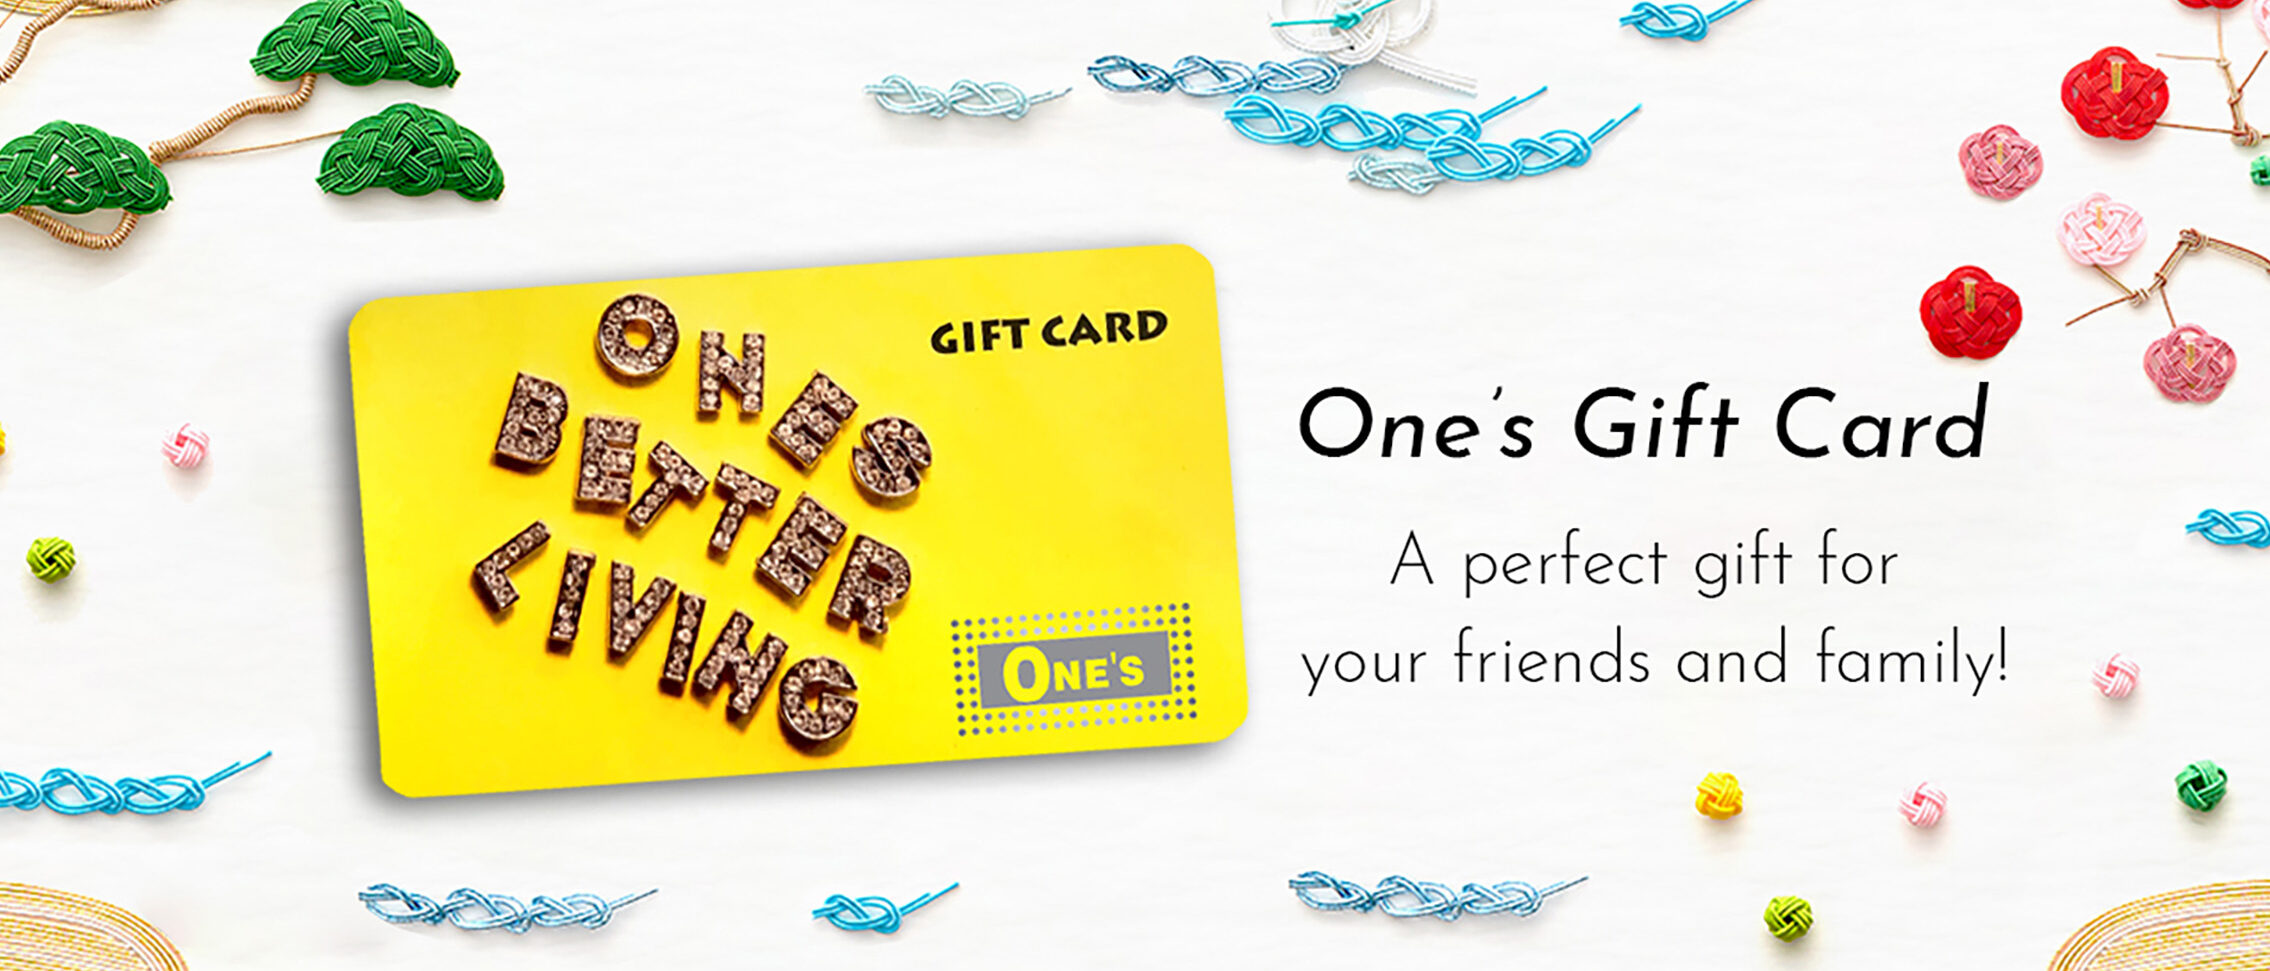 One's Gift Card. A perfect gift for your friends and family.